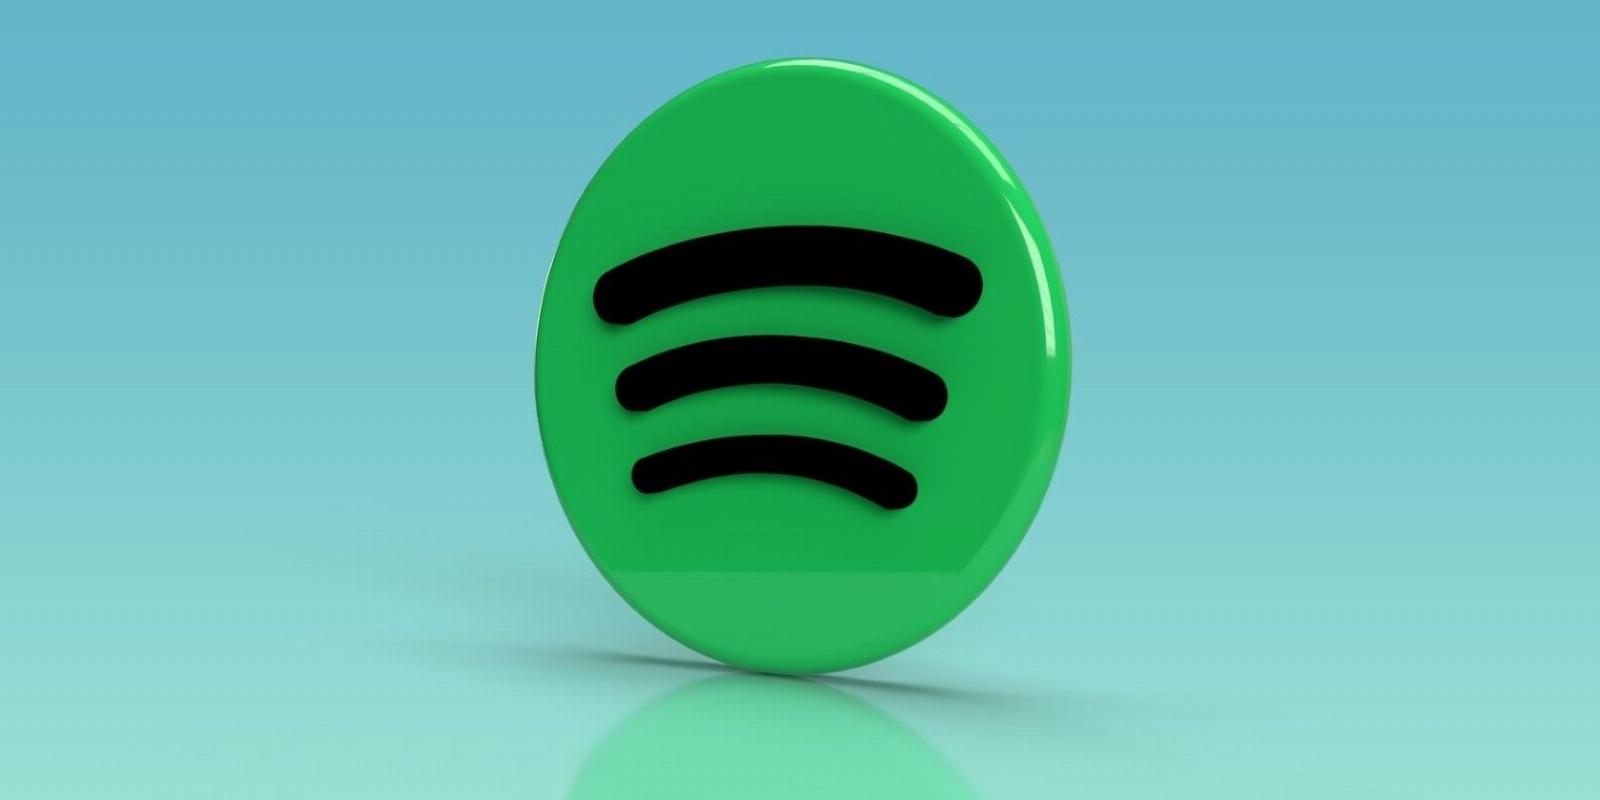 How to Stop Spotify From Starting Automatically on Windows